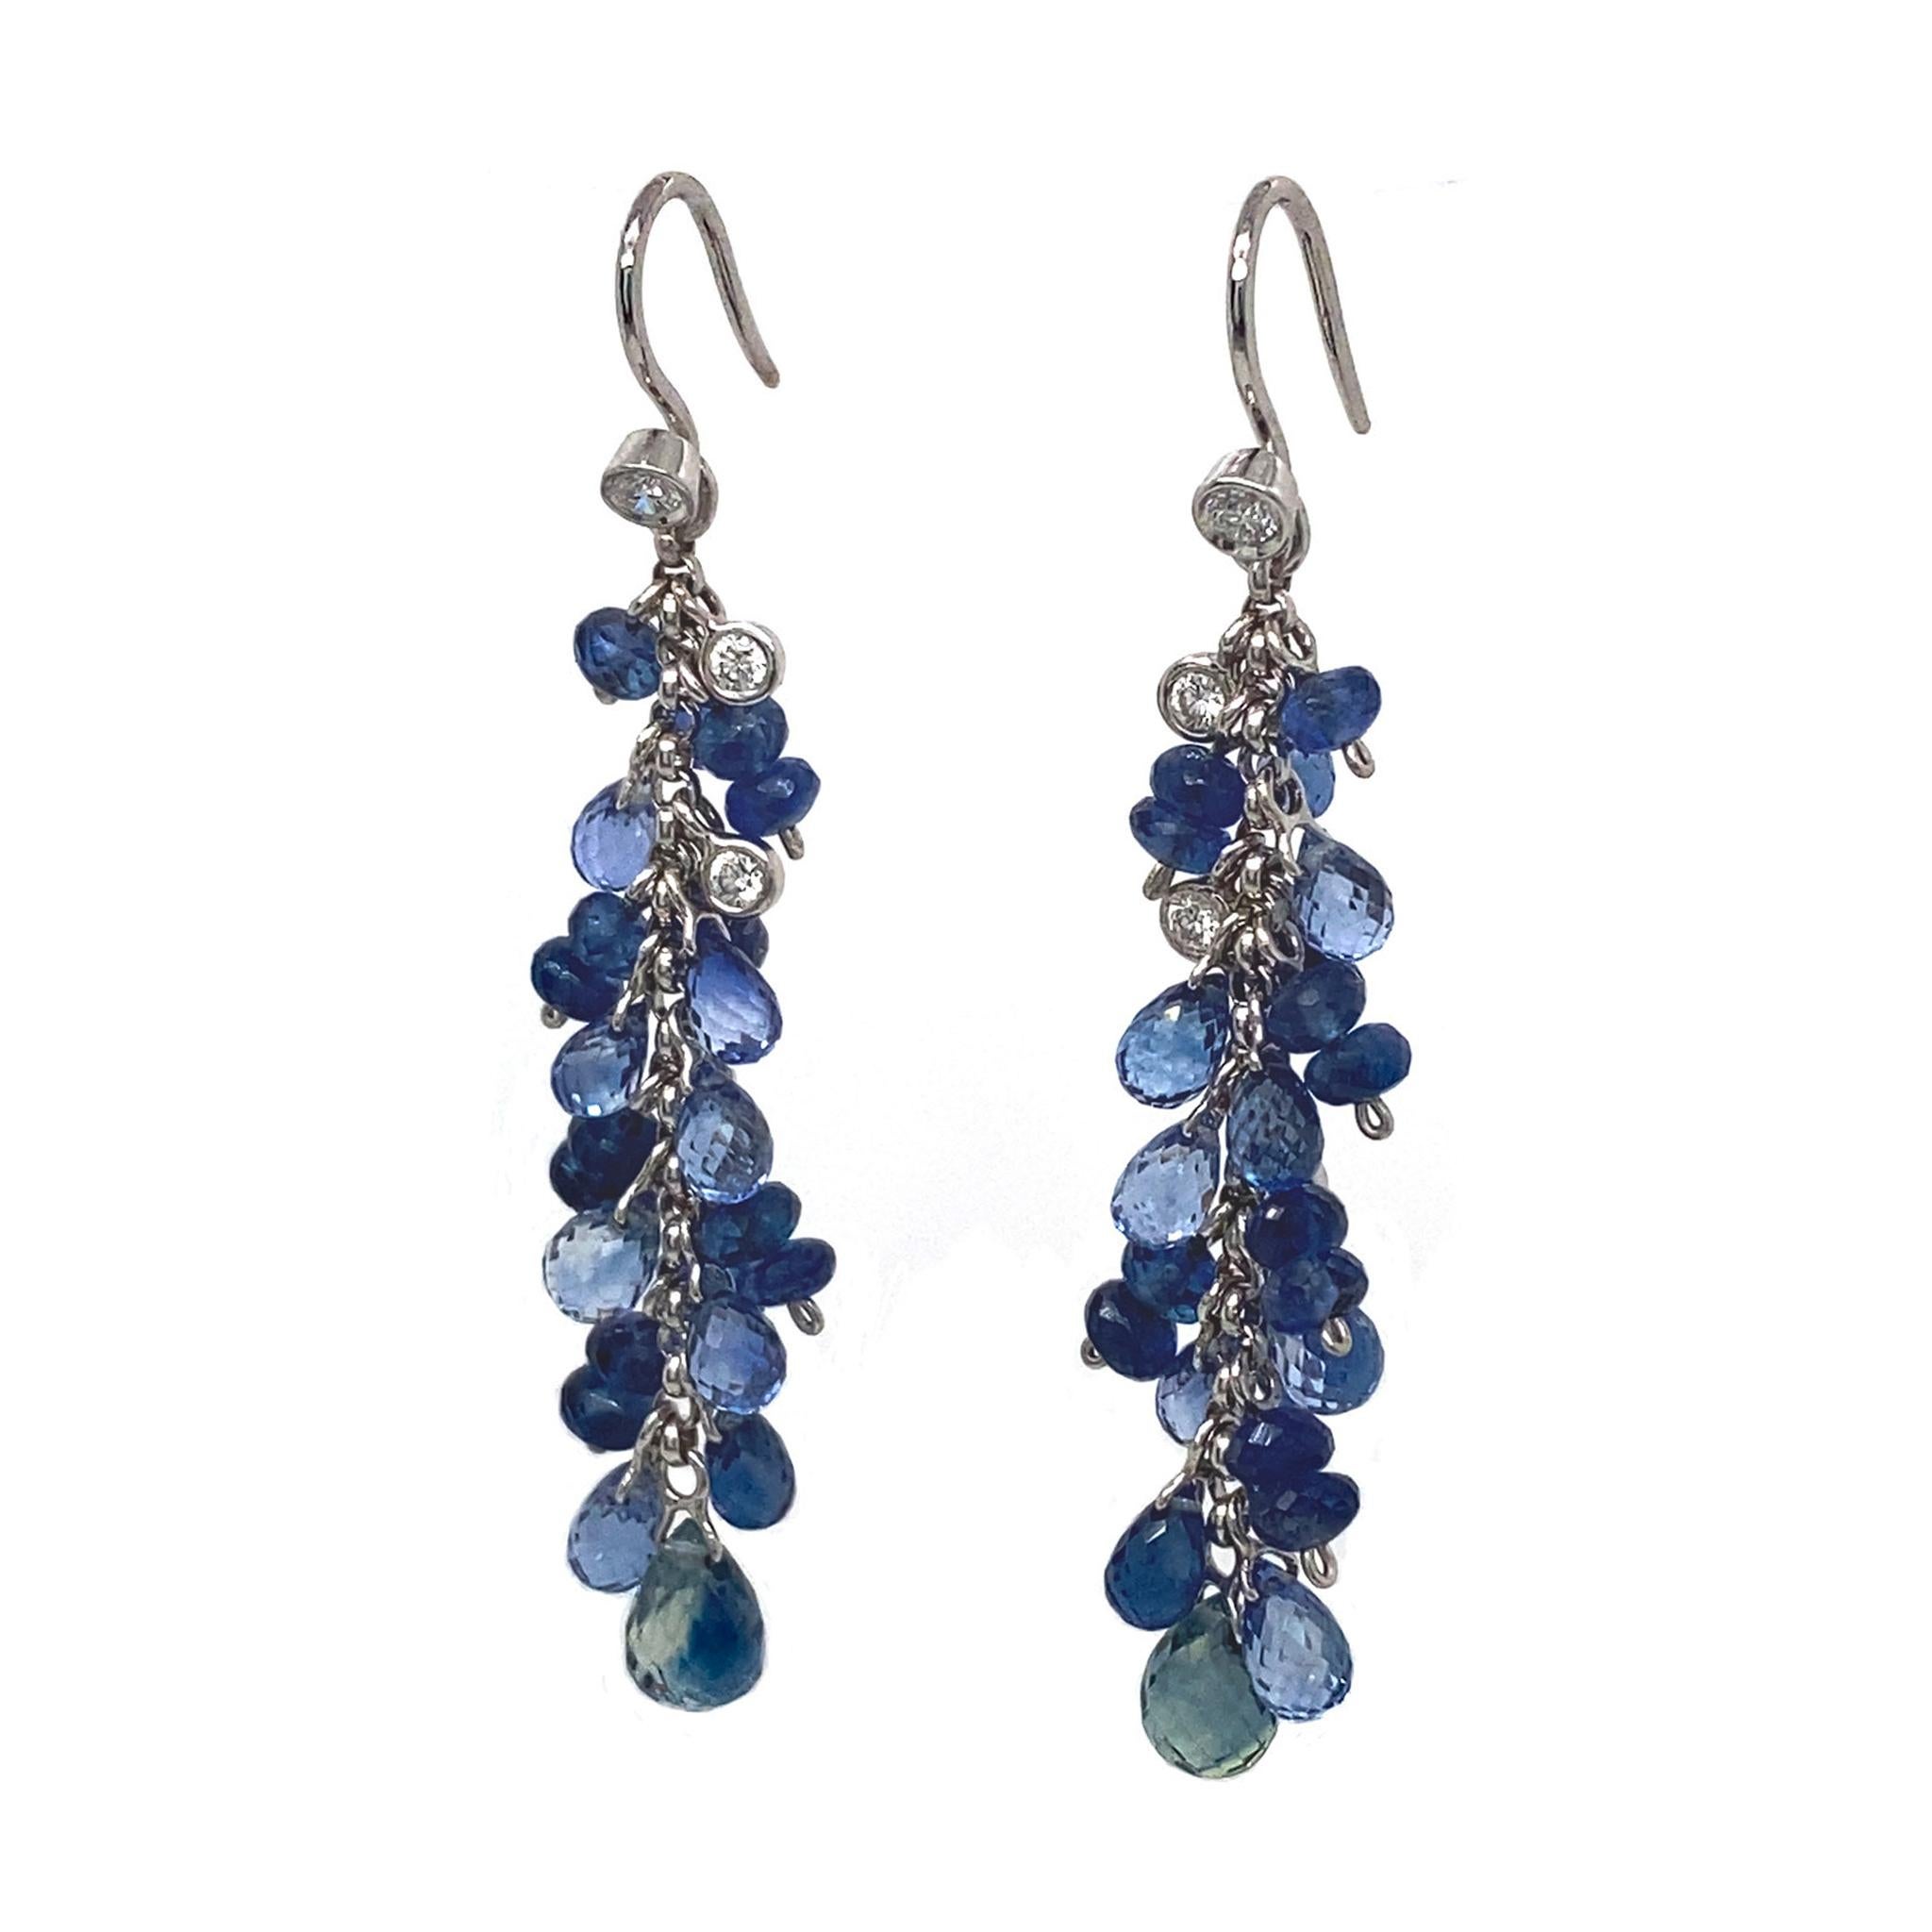 The perfect accessory to pair with every flowy outfit on your summer getaway. The drops of 22 Blue Sapphires Briolettes (9.02ct) and 26 Blue Sapphire Beads (5.90ct) are designed to be dynamic for movement. For your effortless everyday wear, simple